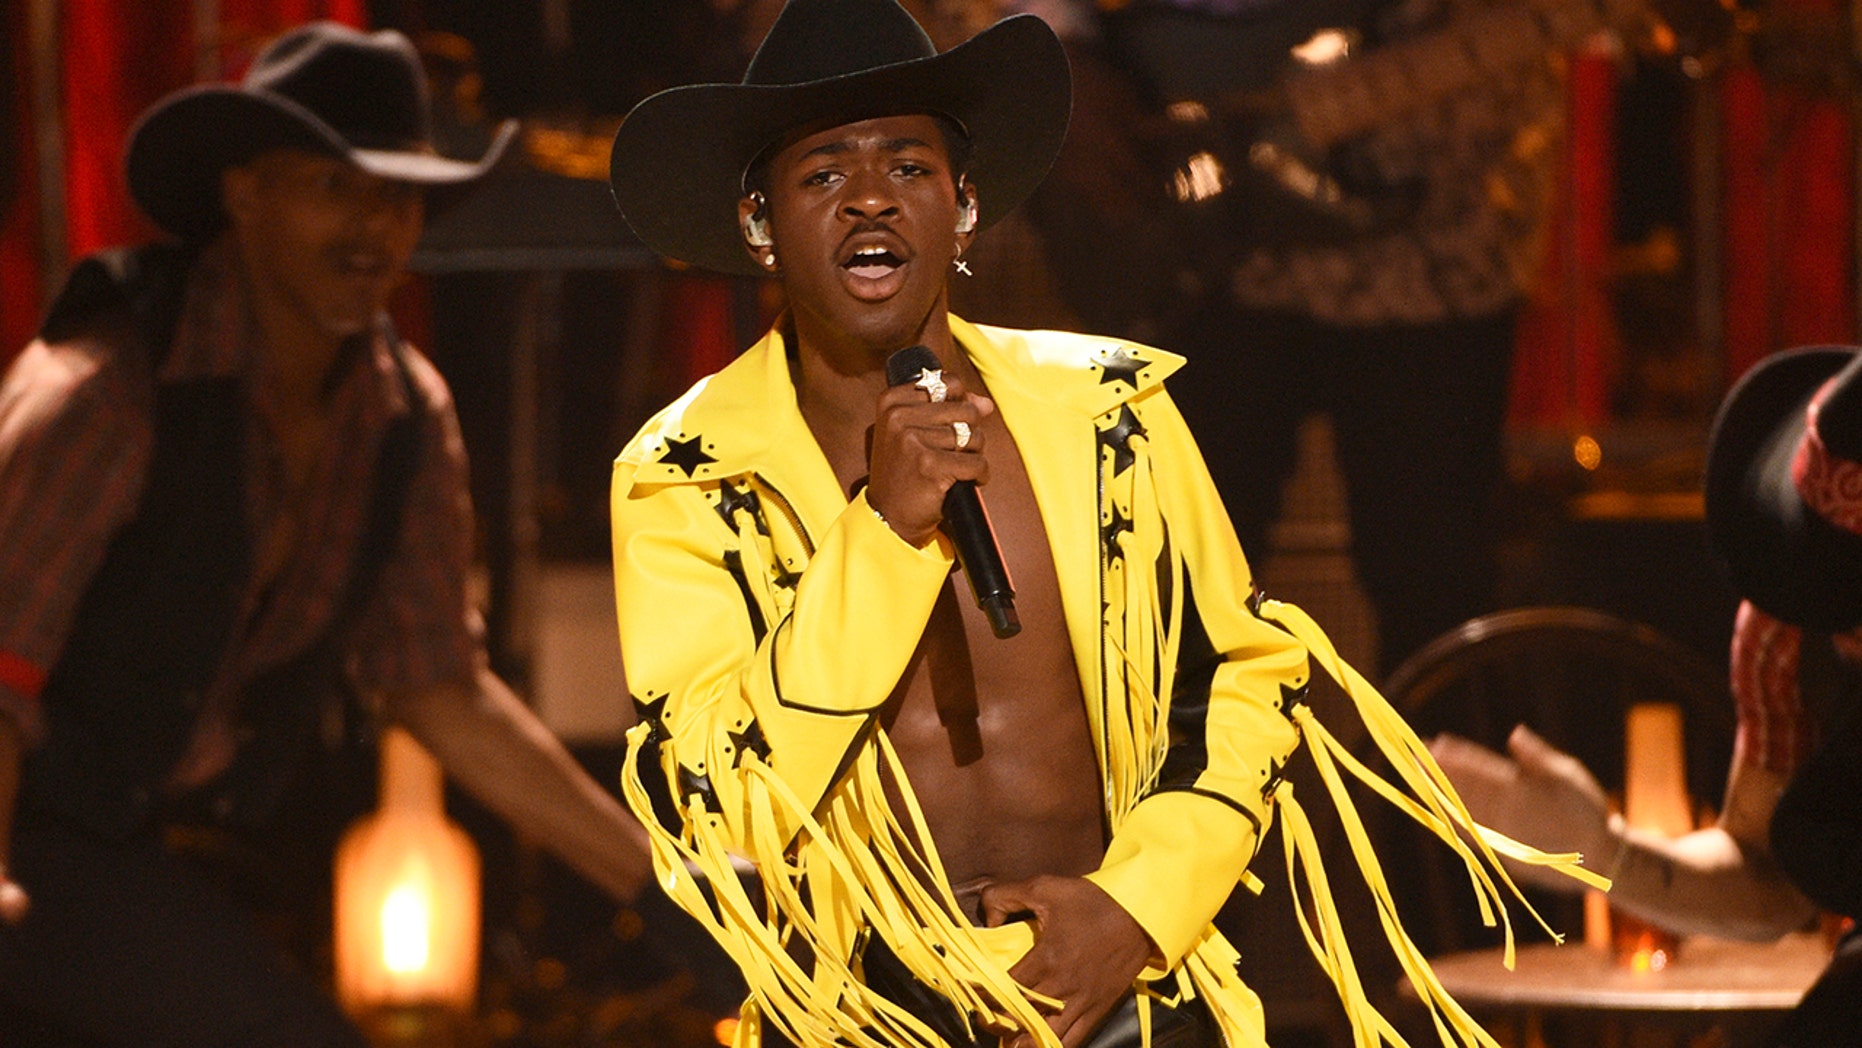 Old Town Road Rapper Lil Nas X Appears To Come Out During Pride Month Fox News Lamung Jakot